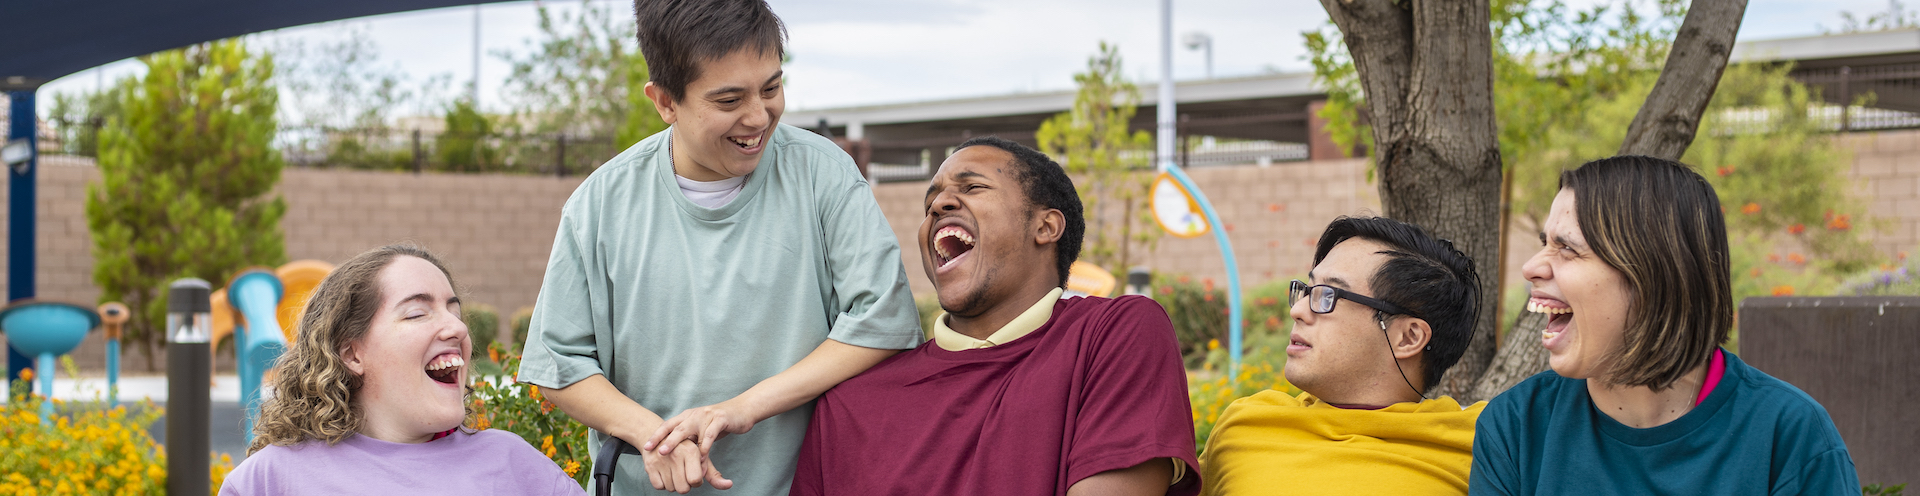 Community Driven Activities for Adults with Intellectual Disabilities - BLOG